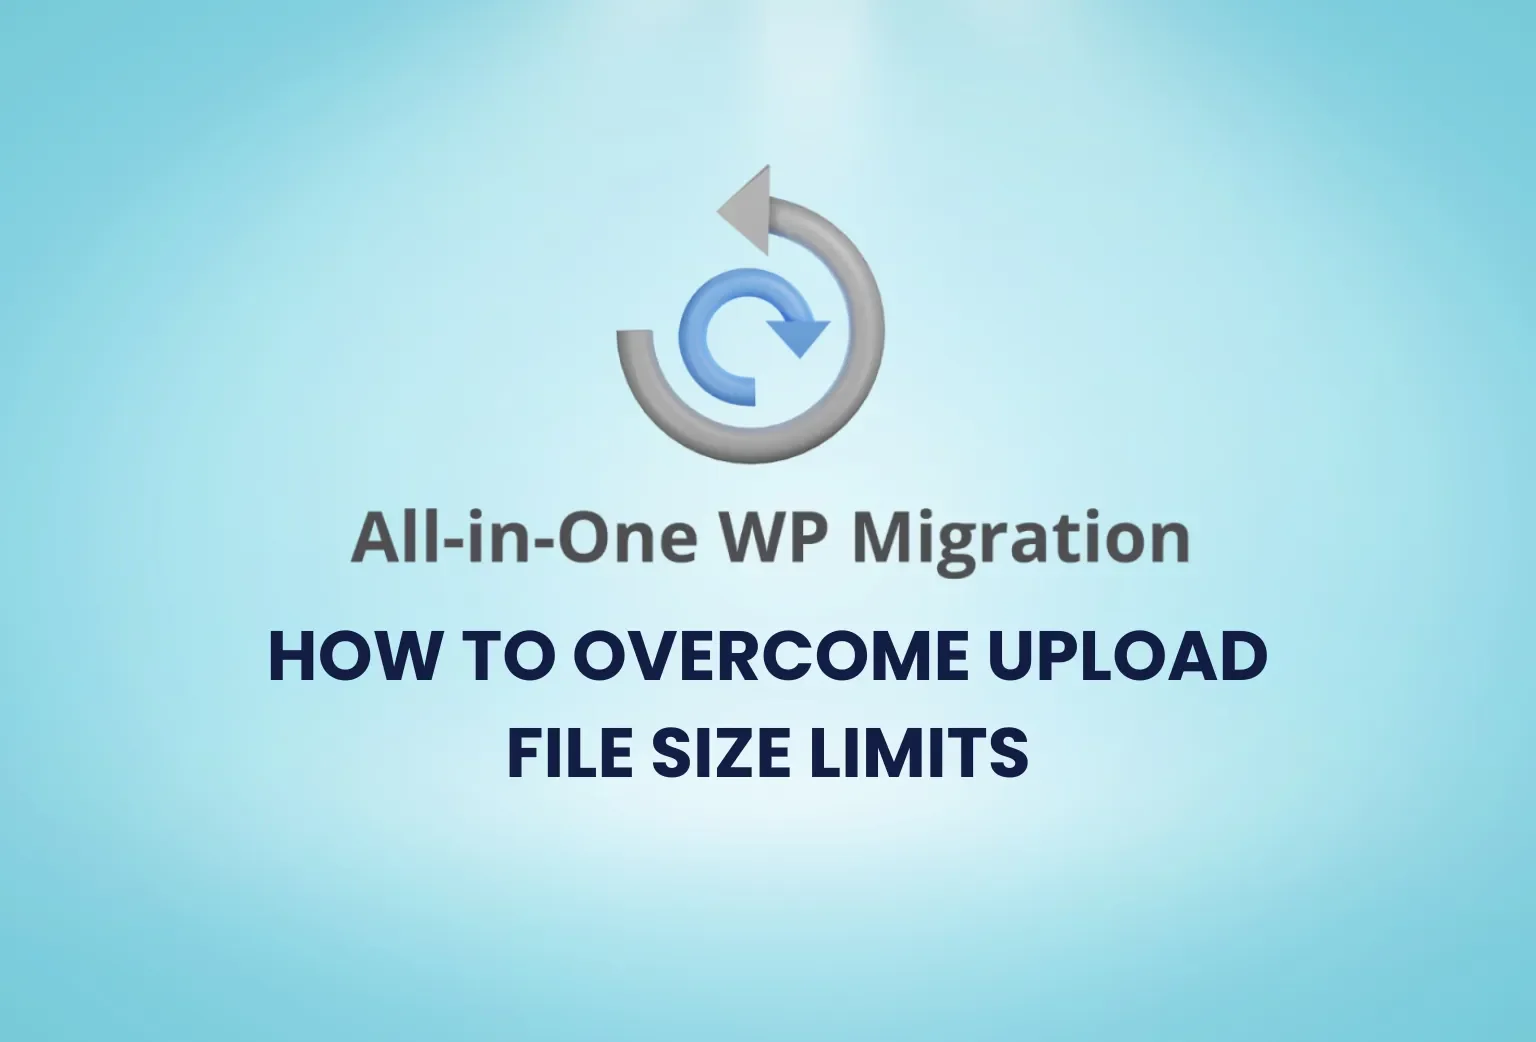 How to Overcome Upload File Size Limits